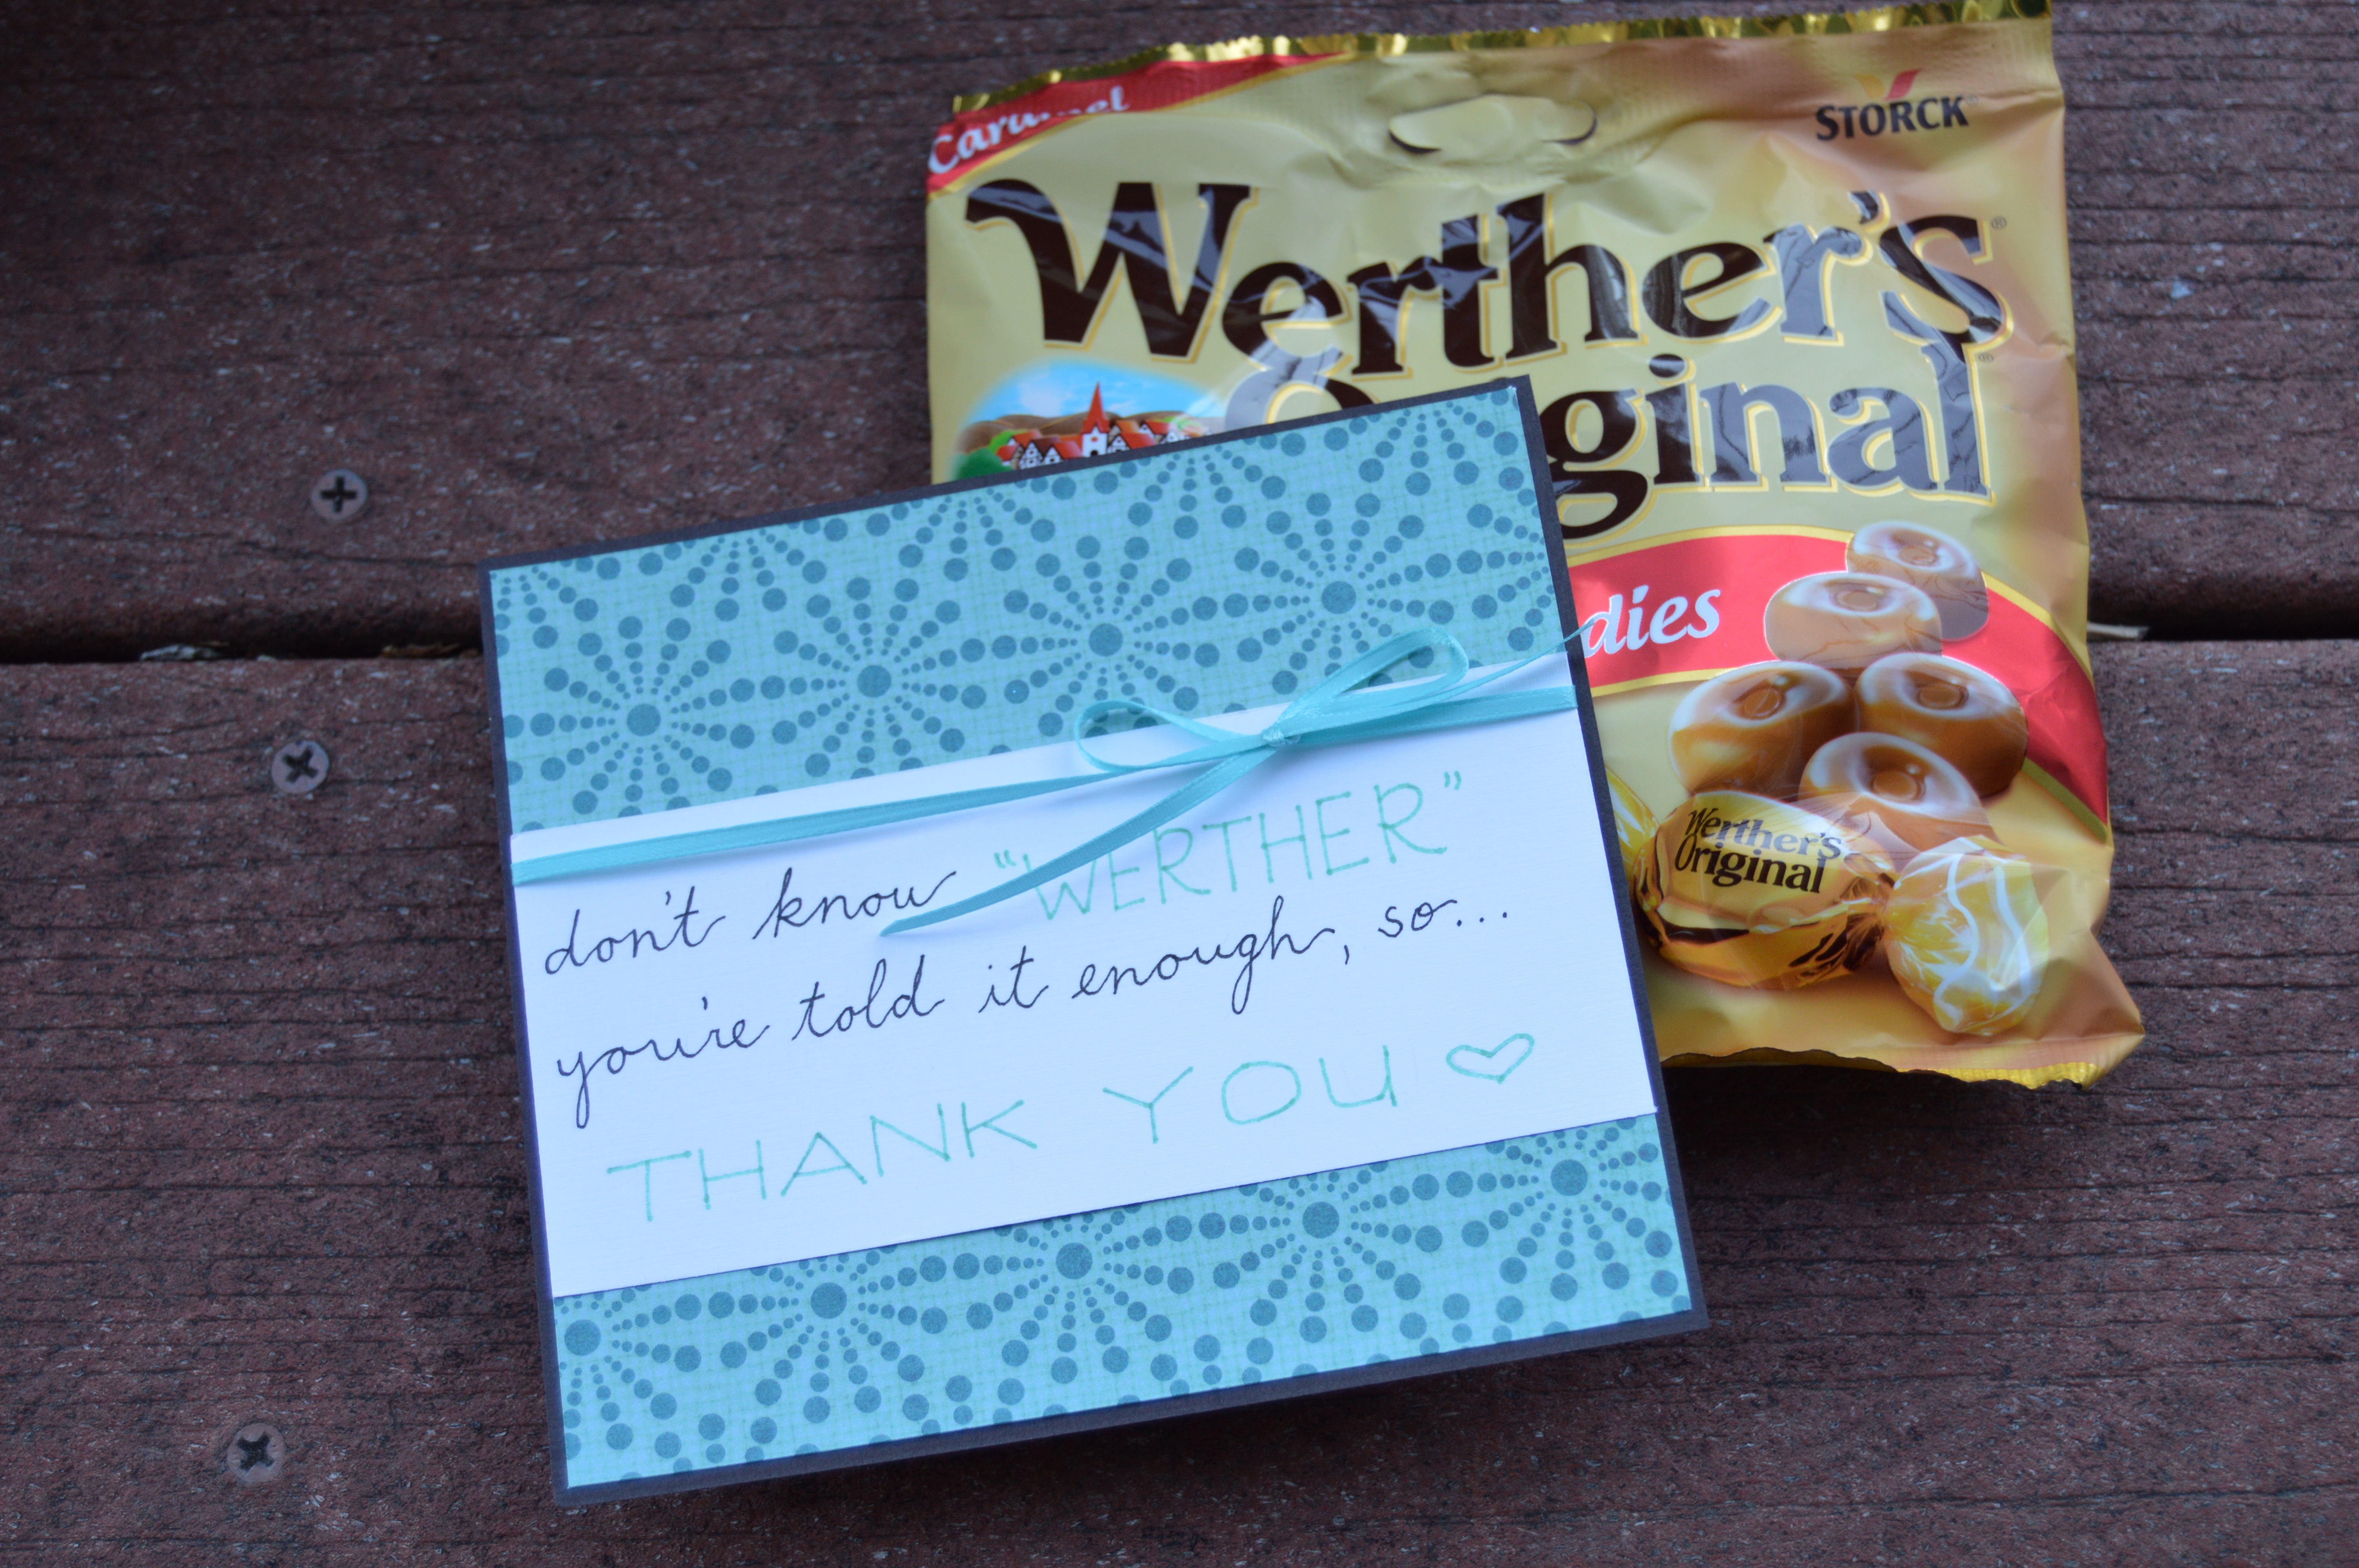 Cute candy thank you gift with Werther's Original caramel candies. Clever 'werther or not' play on words for a fun way to say thank you with candy.